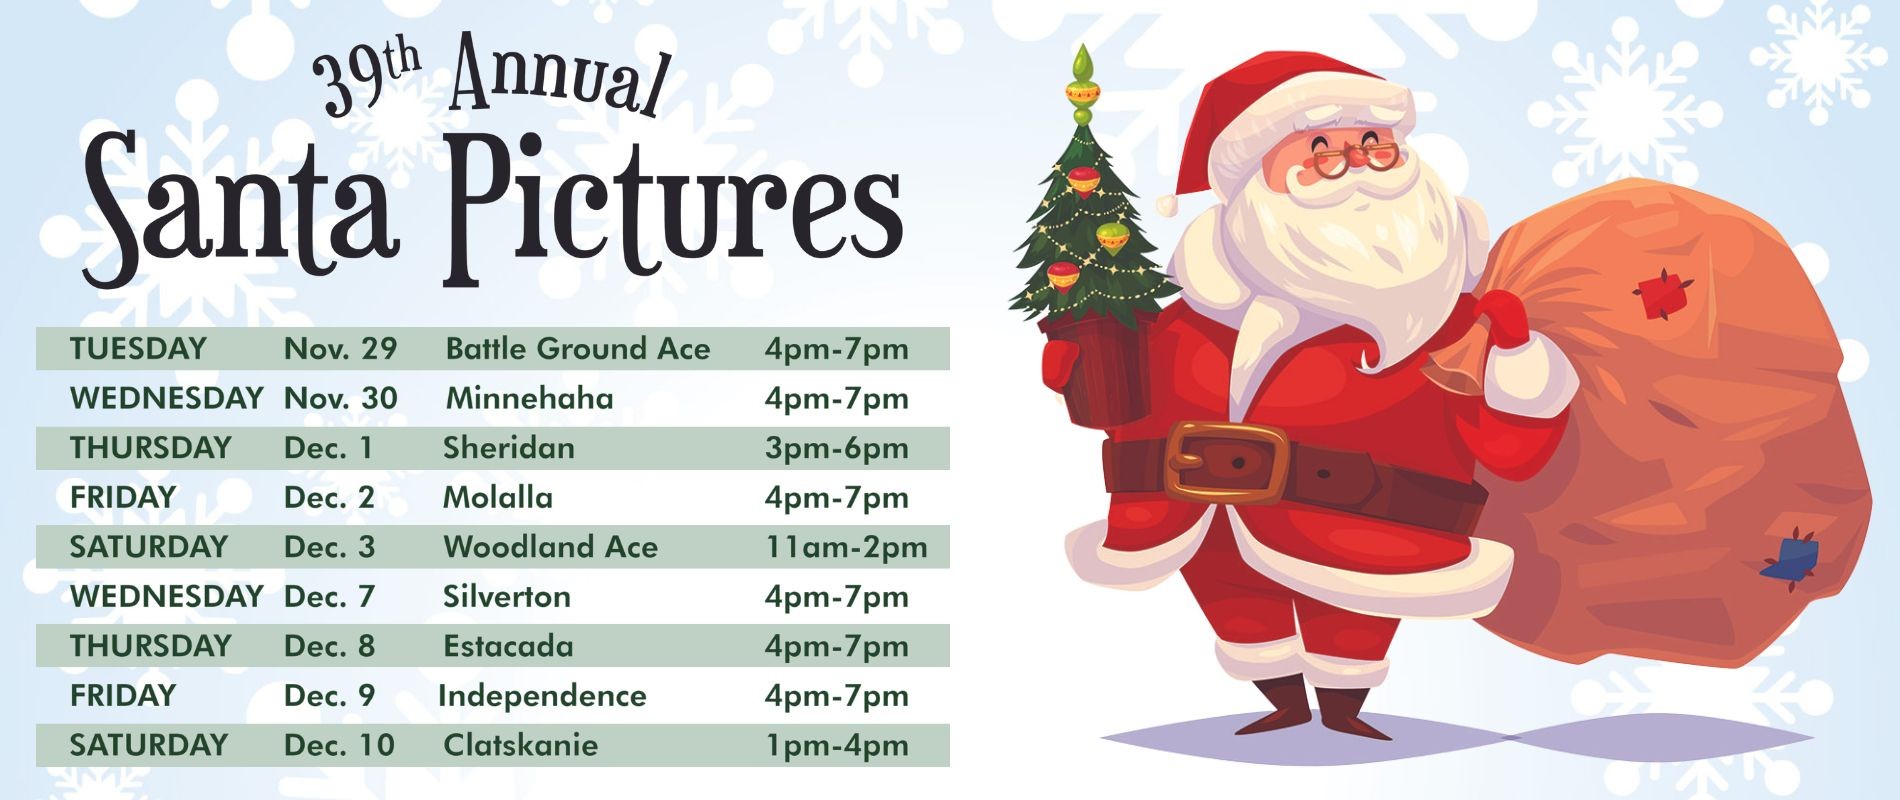 Join Us For Our 39th Annual Santa Pictures!